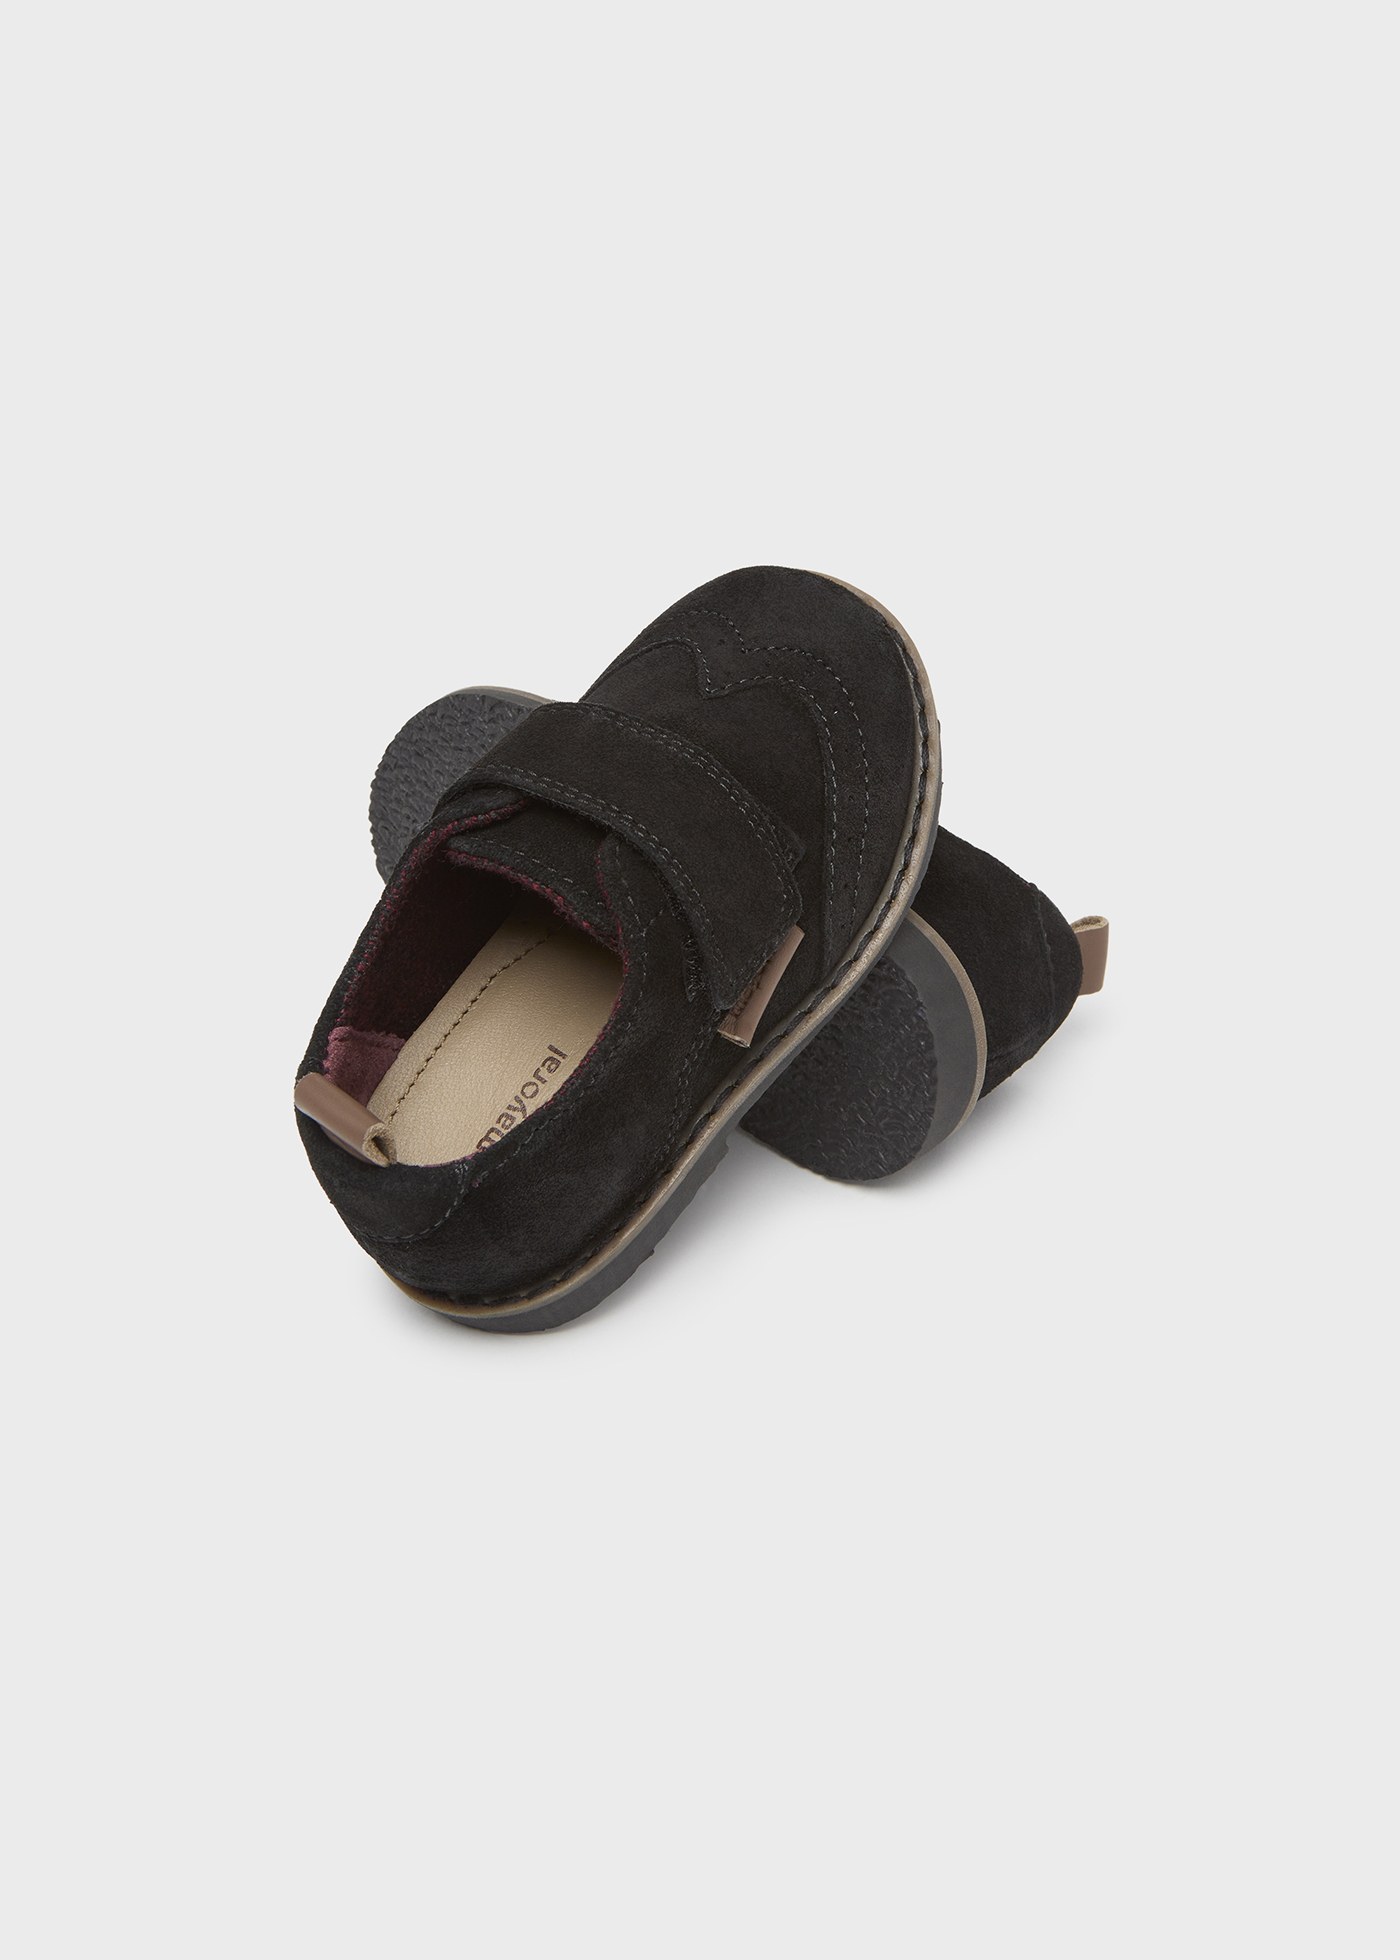 Baby leather Oxford shoes